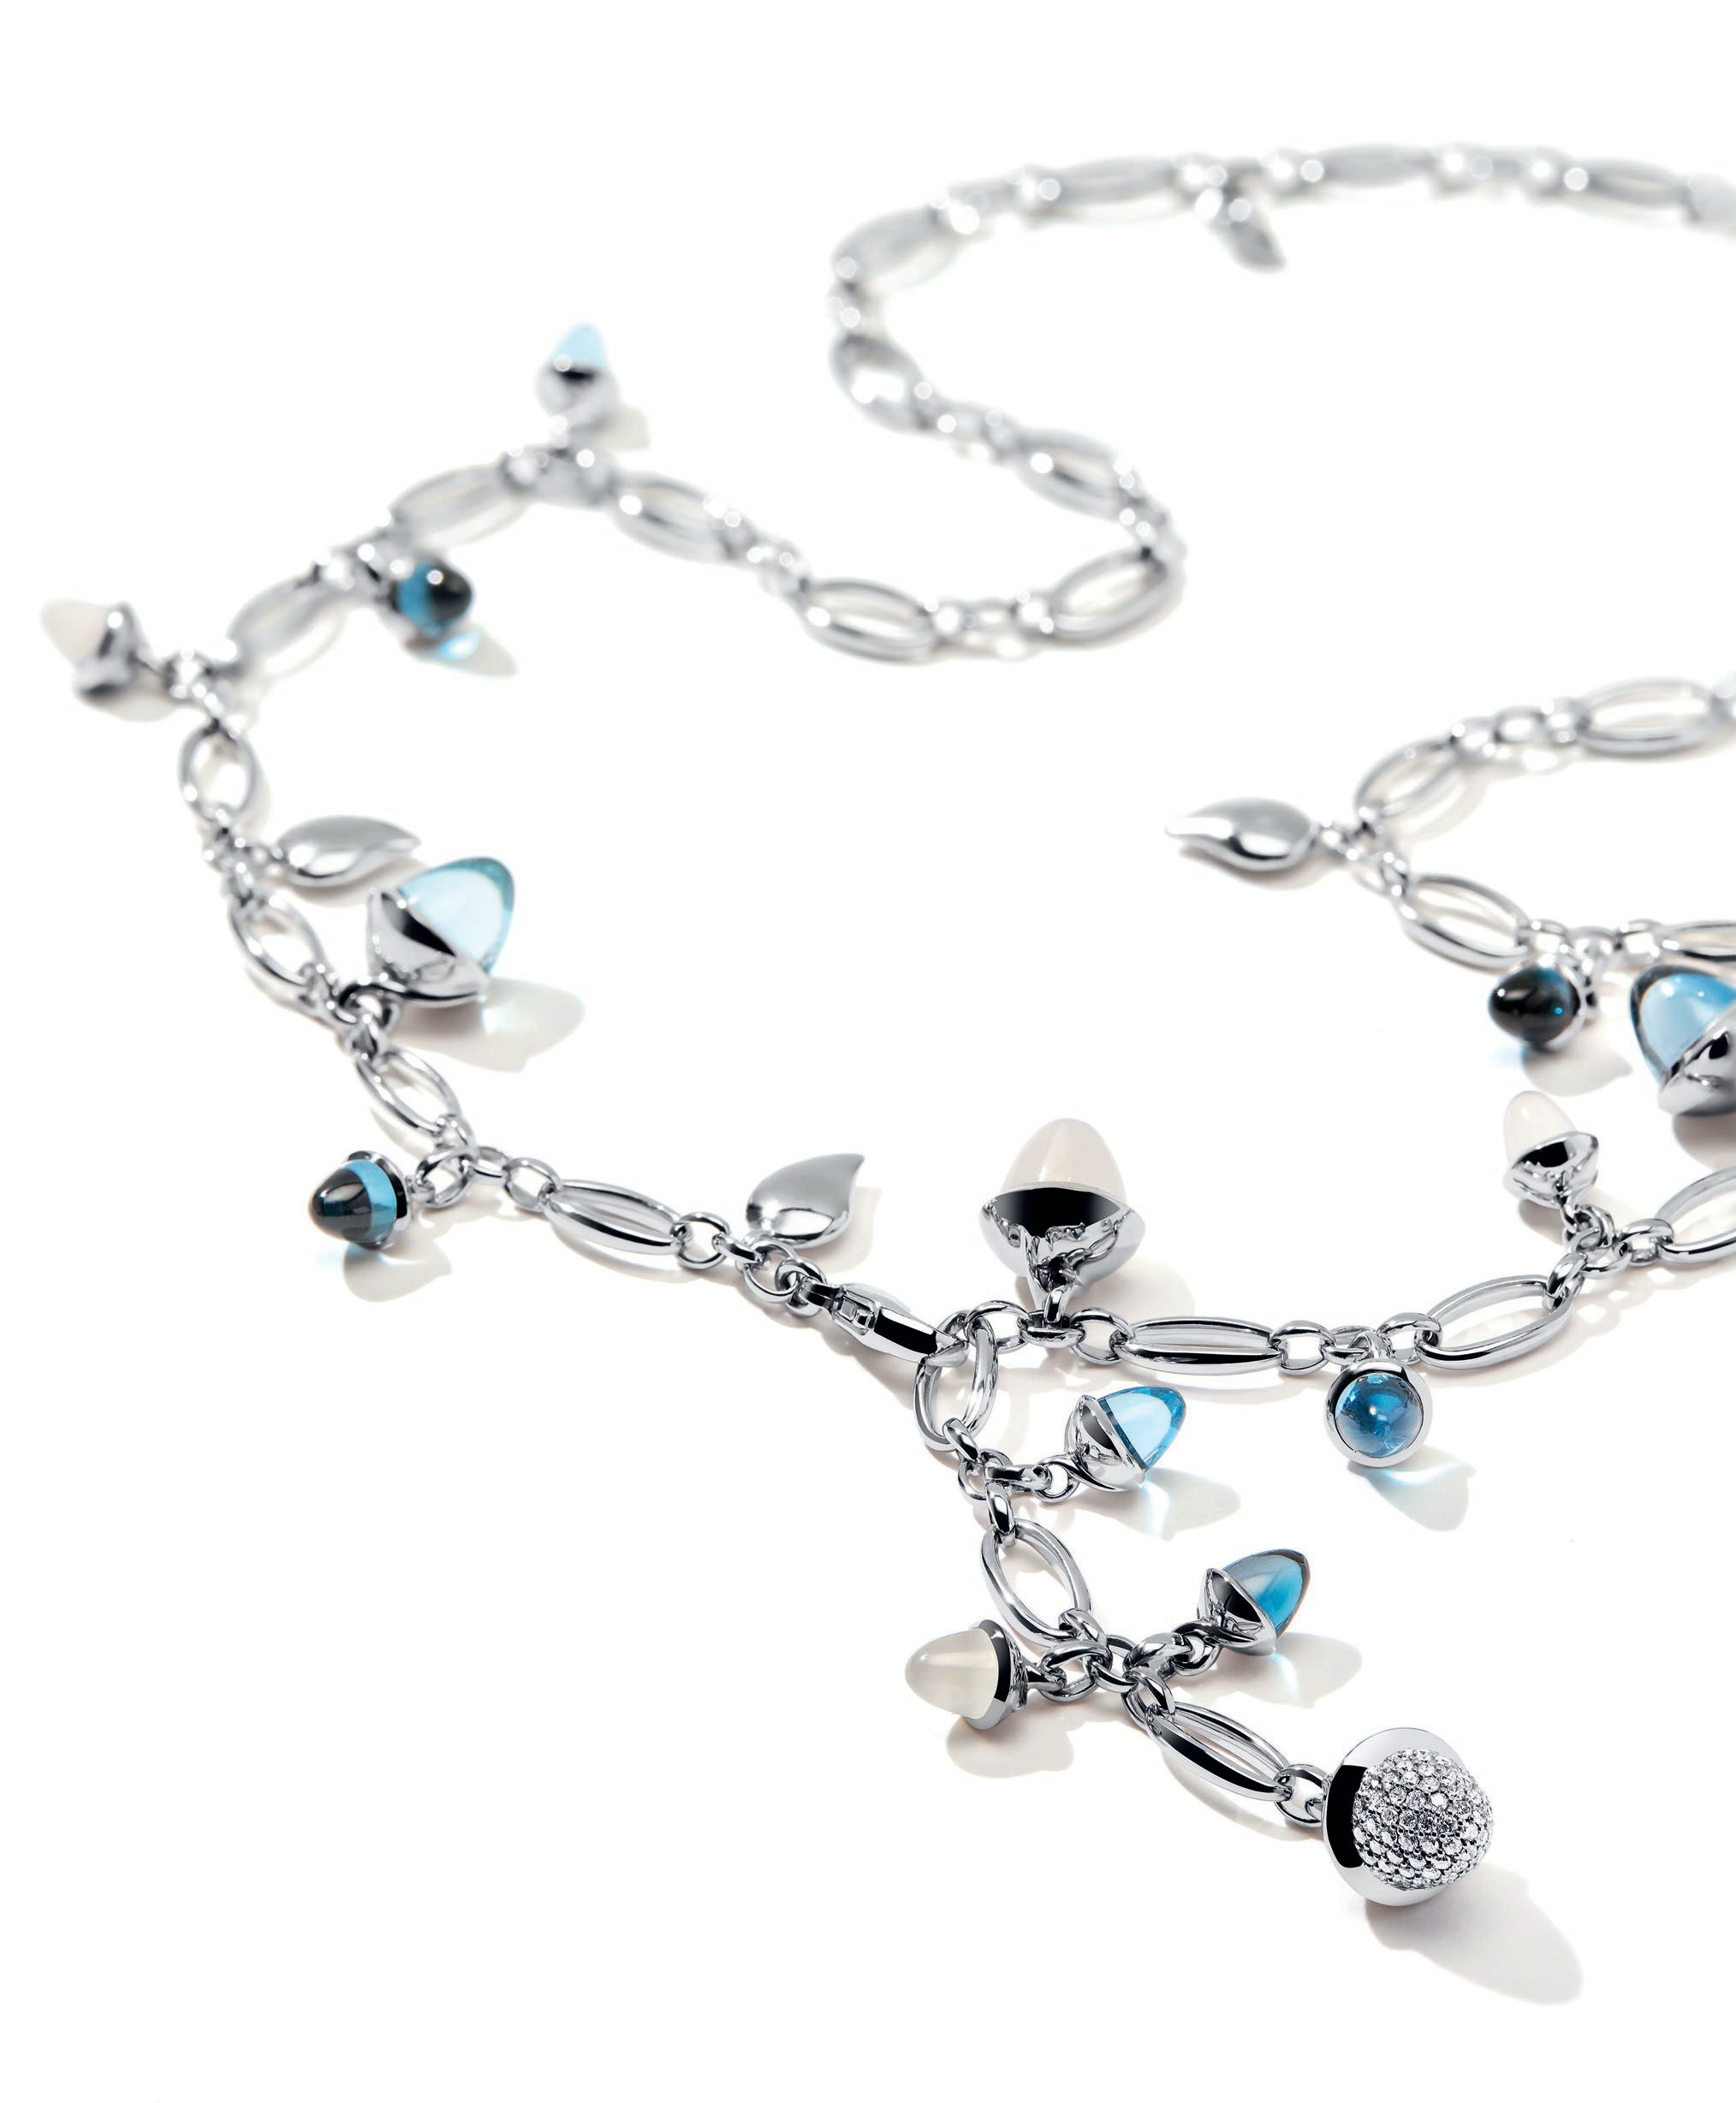 Mikado Ocean necklace with diamond pave, 56 cm PHOTO COURTESY OF THE BRAND